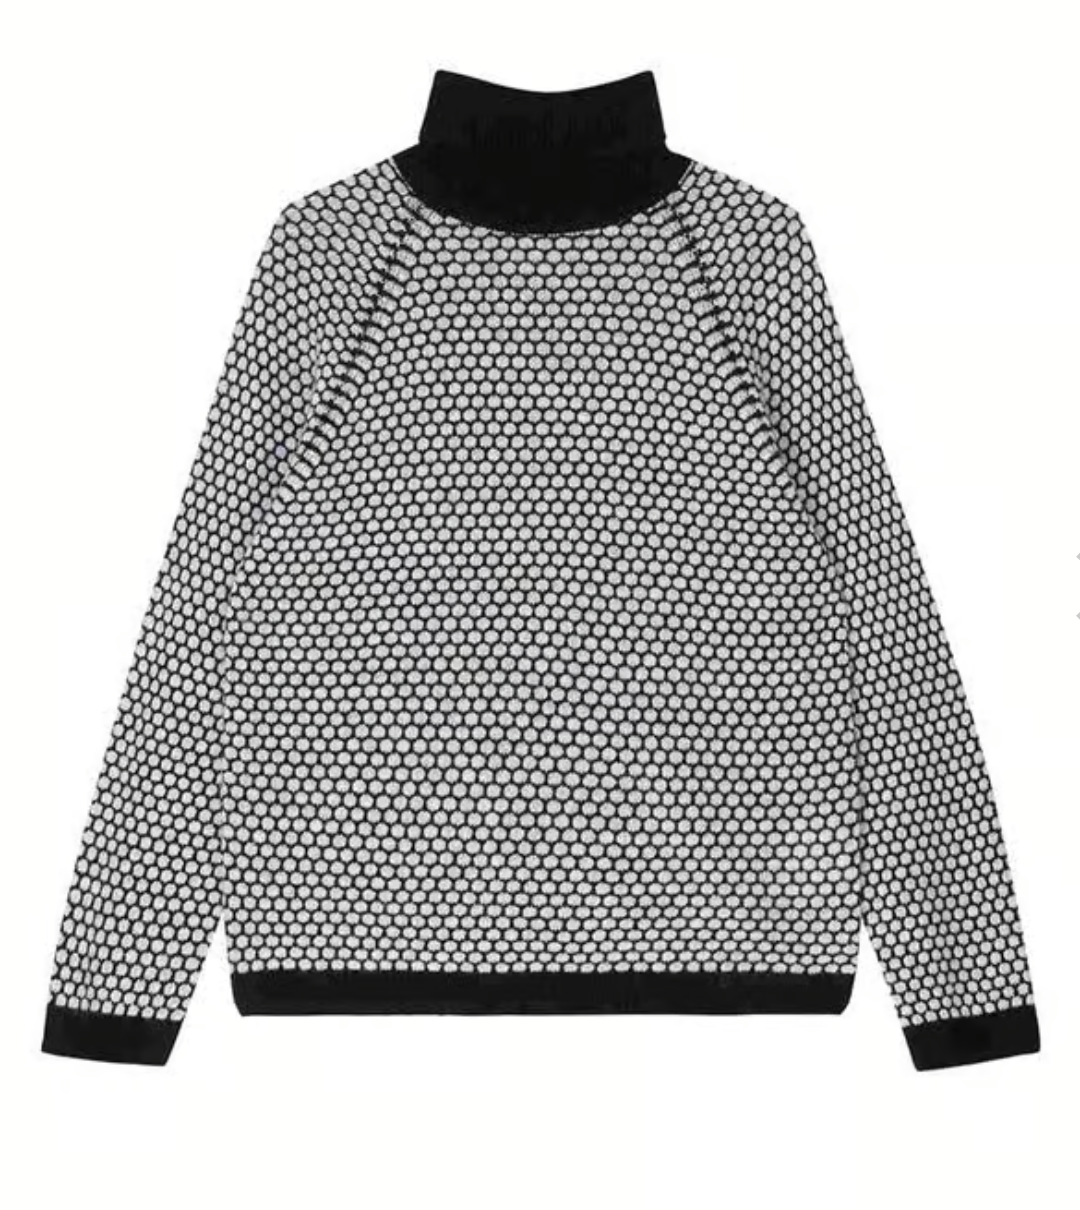 HONEYCOMB ROLL COLLAR IN BLACK MARBLE - Romi Boutique